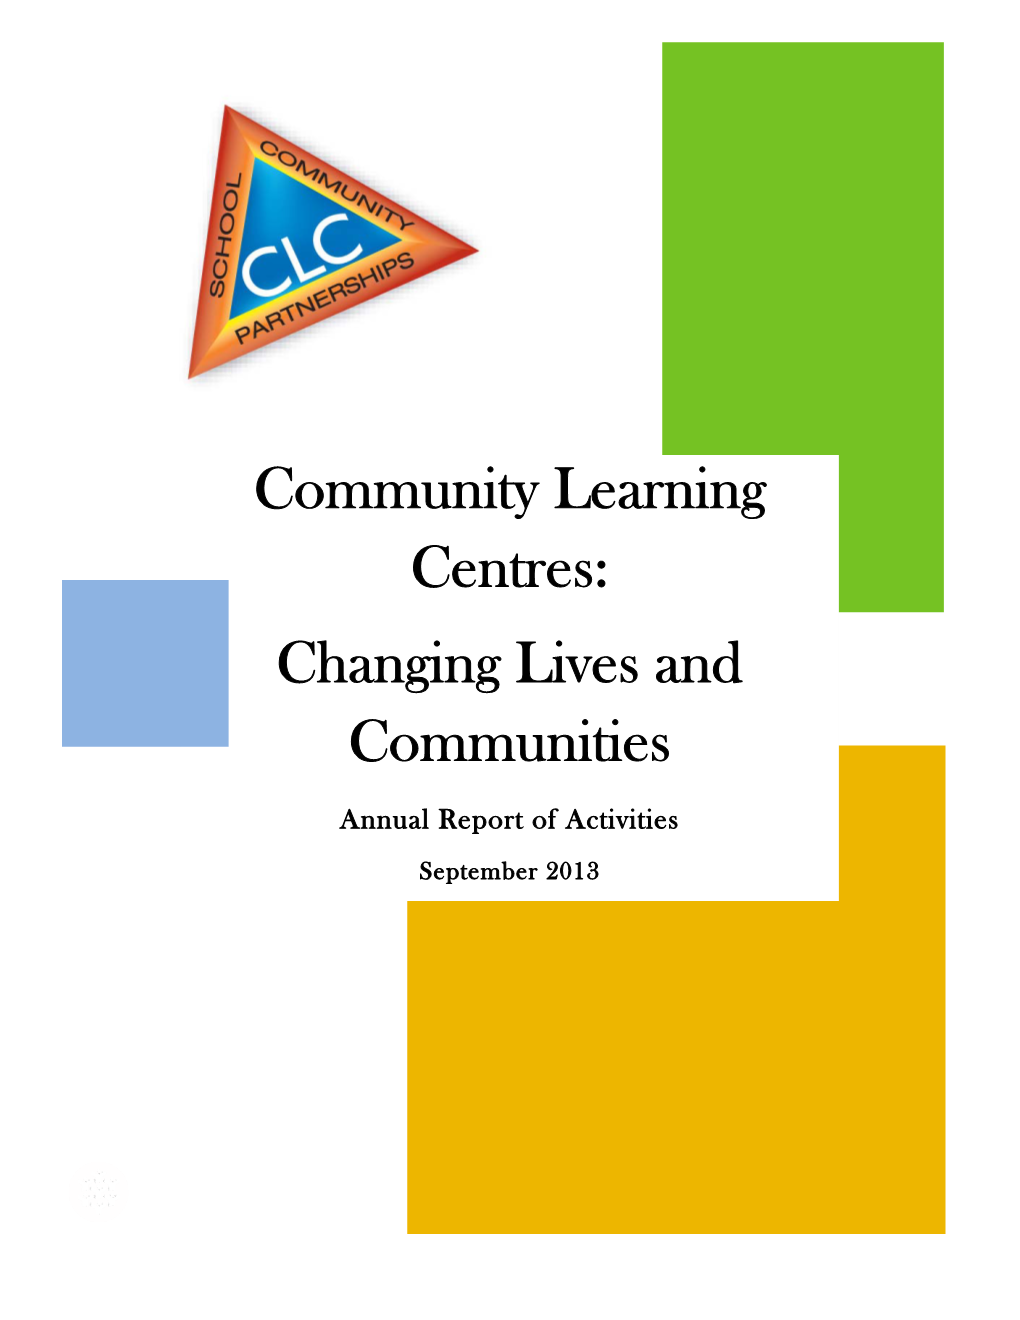 Community Learning Centres